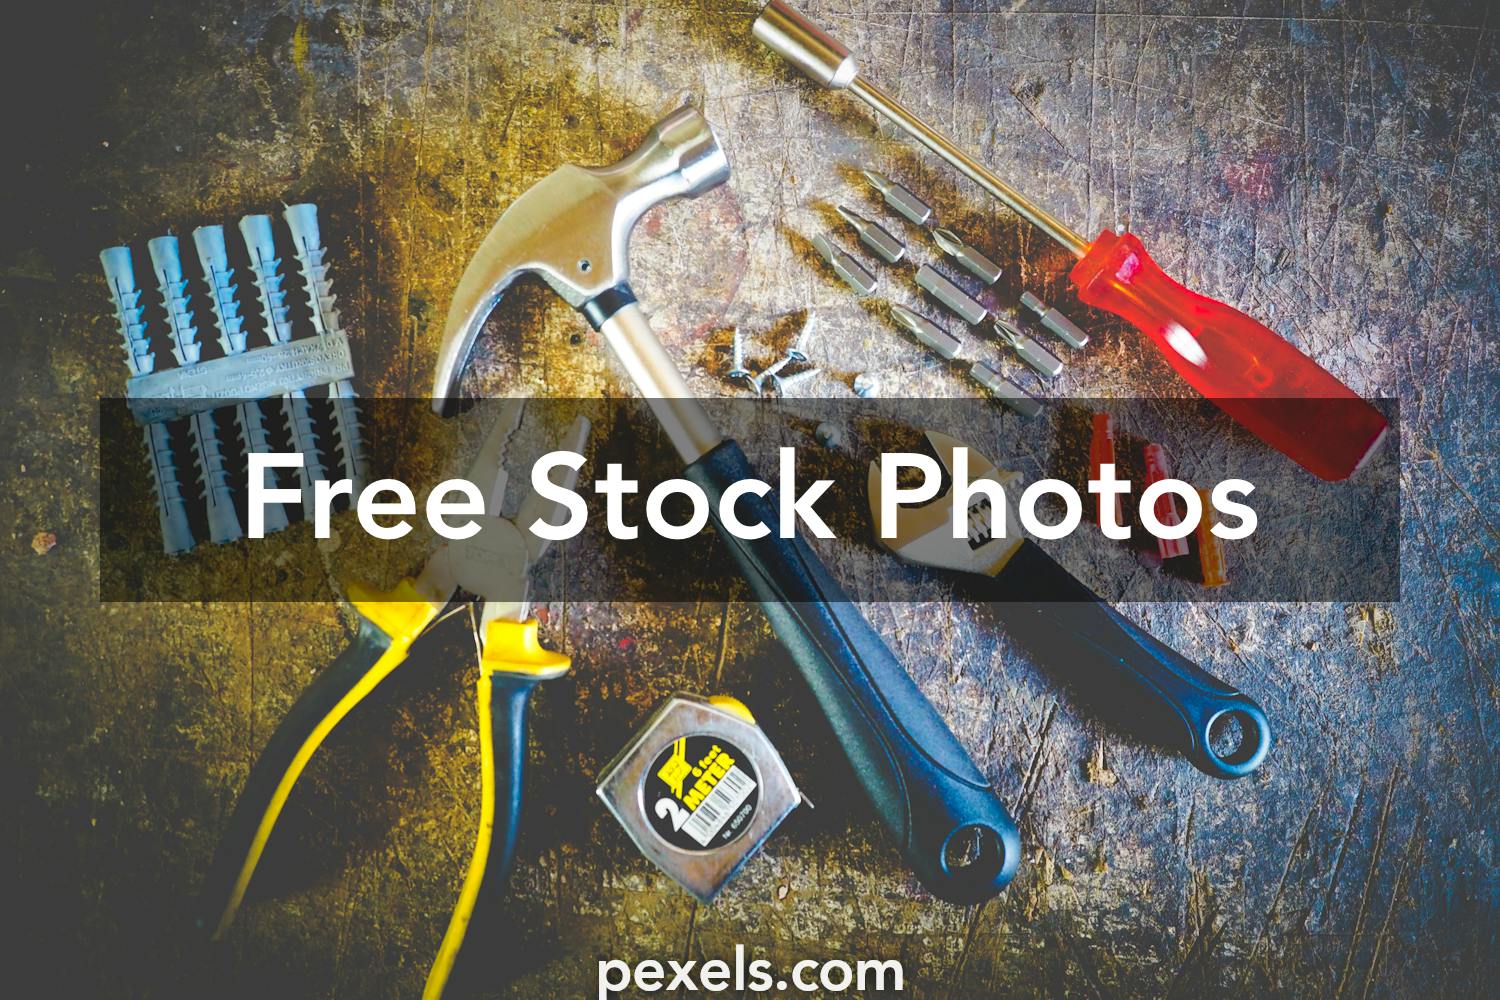 Hardware Tools Photos, Download The BEST Free Hardware Tools Stock Photos &  HD Images